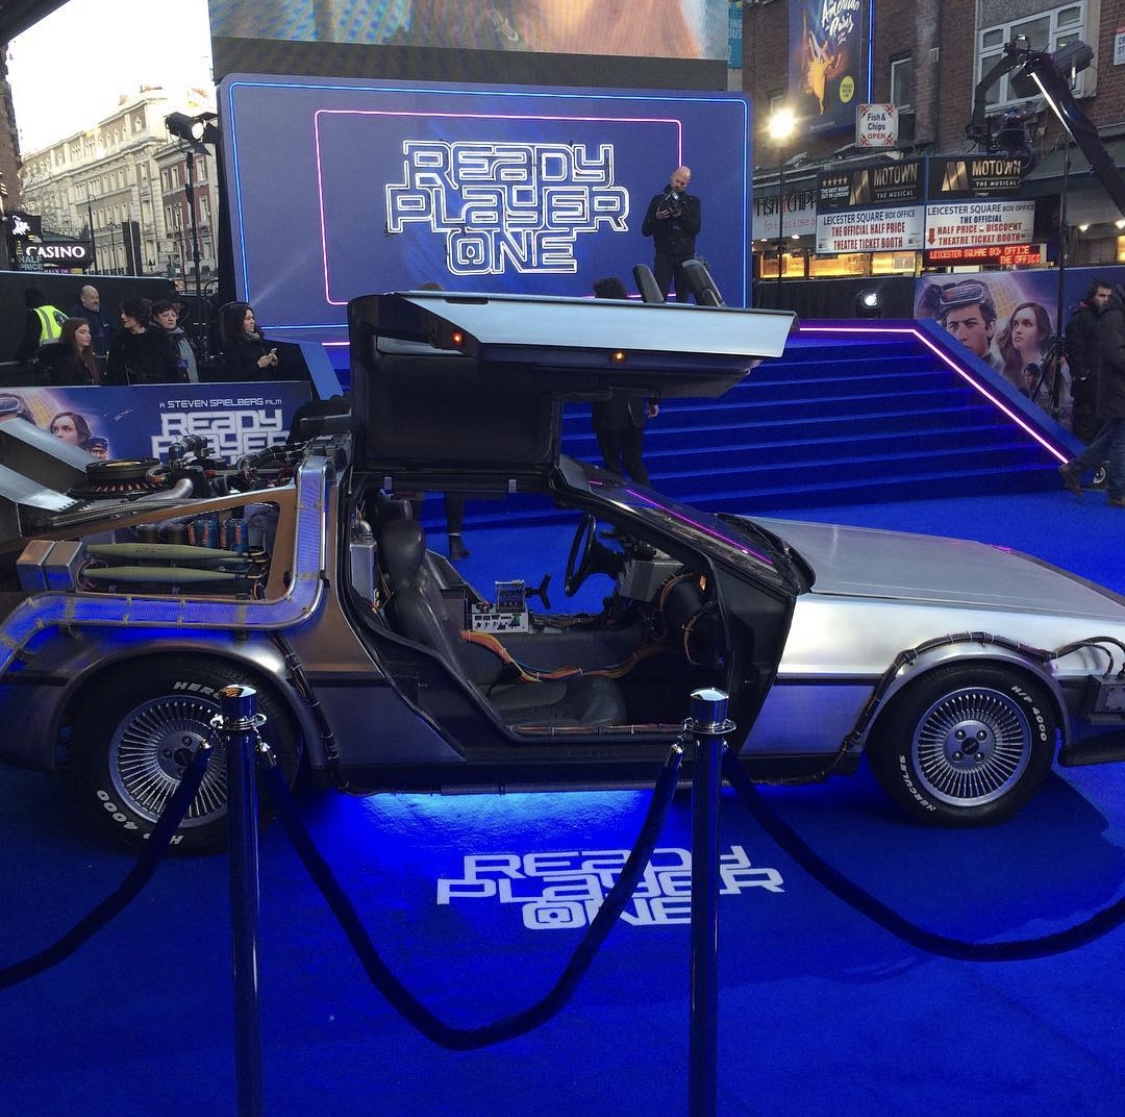 BTTF Car DeLorean Time Machine ready with Alex Zane at the European Premiere of Ready Player One in London